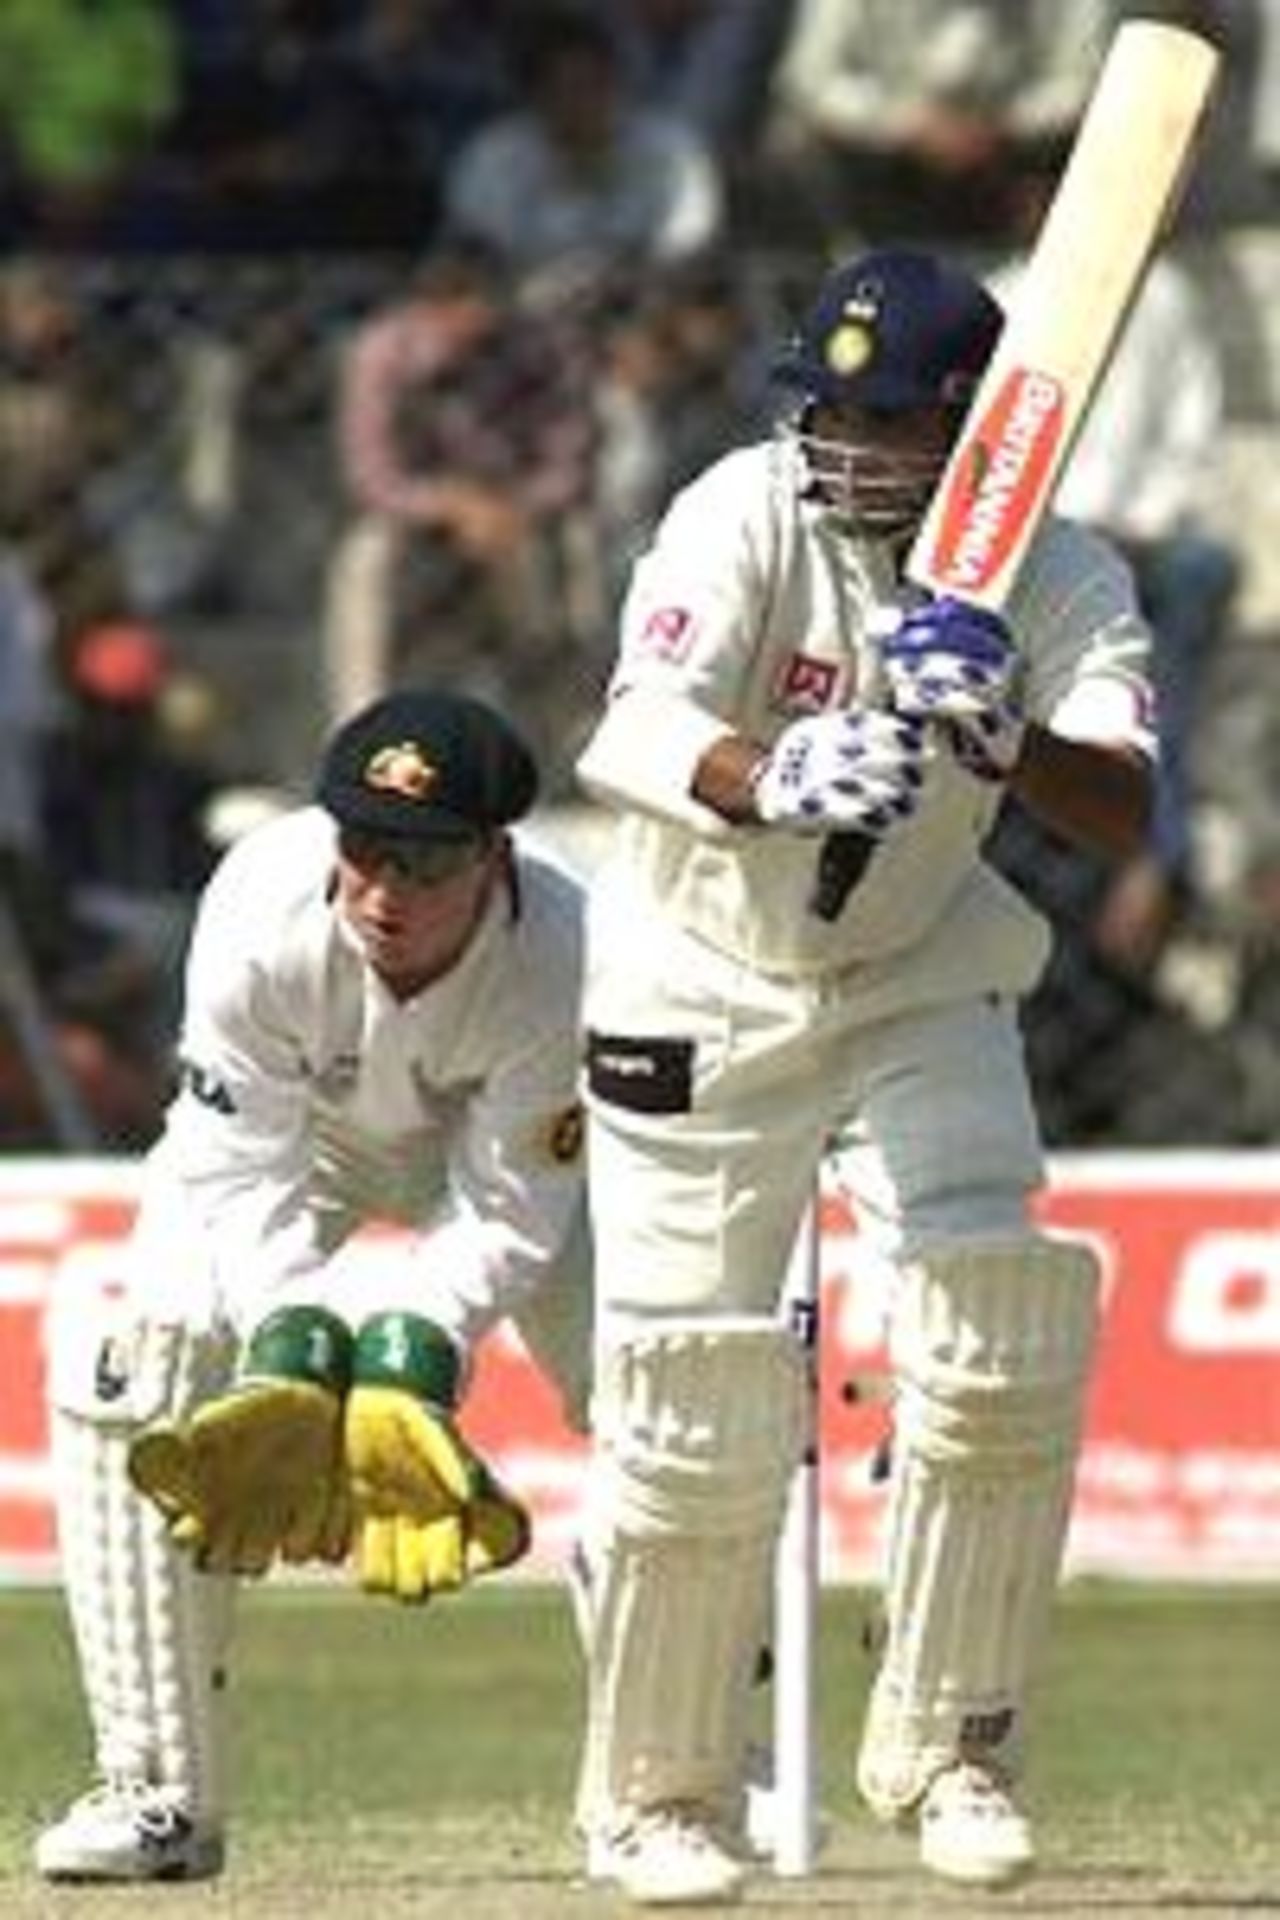 Saurav Ganguly of BP XI drives with Brad Haddin of Australia looking on, during day two of the three day match between the Board President's XI and Australia played at Frazshaha Kotla Ground, New Delhi, India.